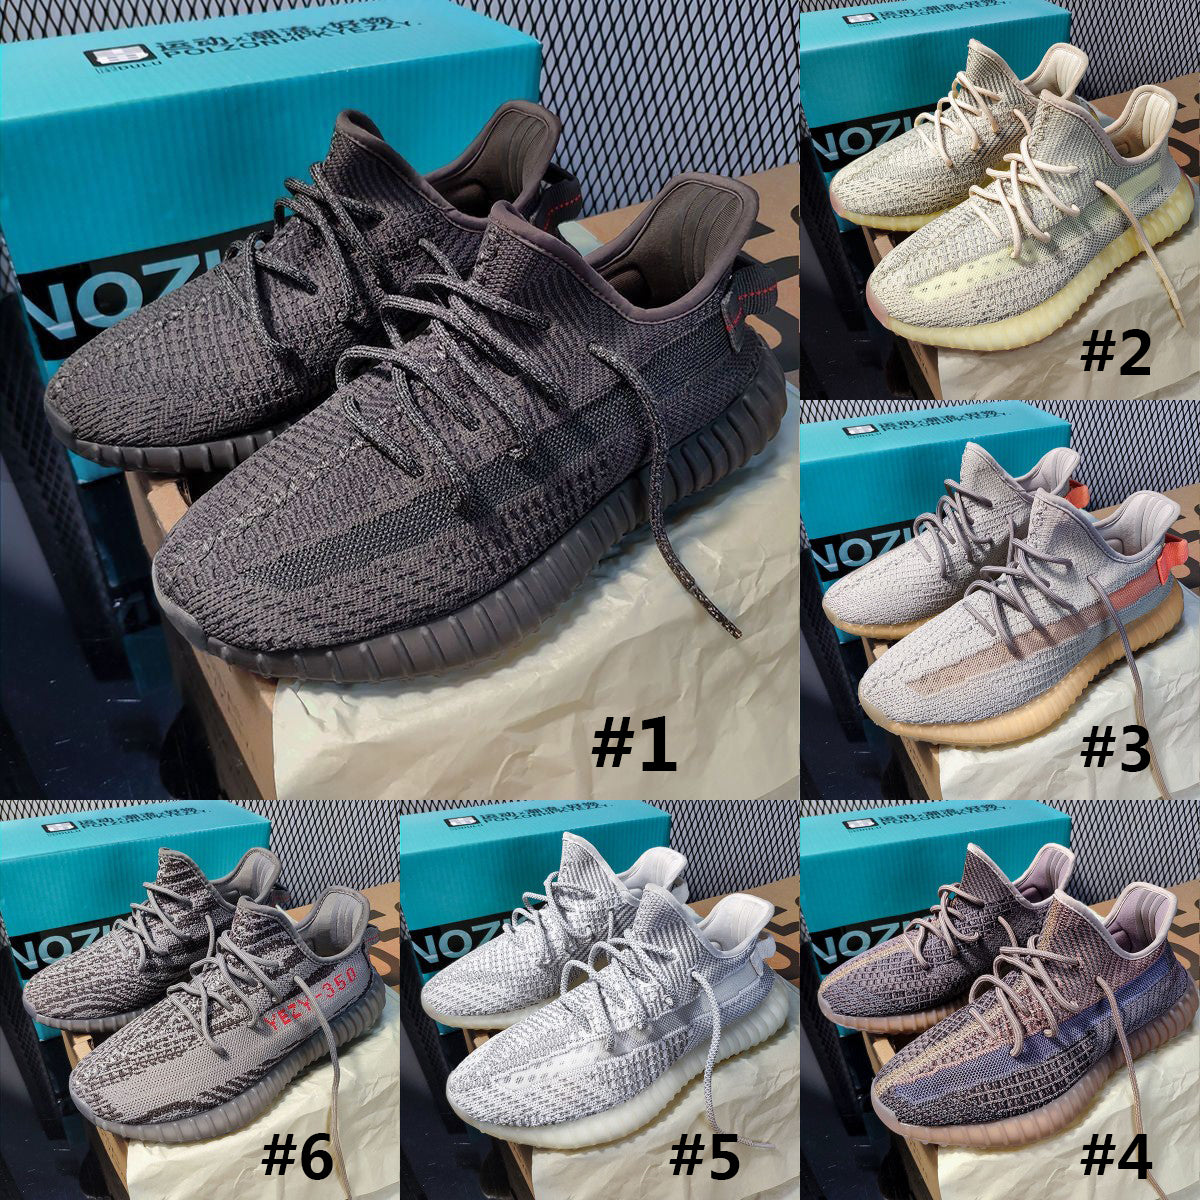 Adidas Yeezy 350 v2 Sneakers Shoes